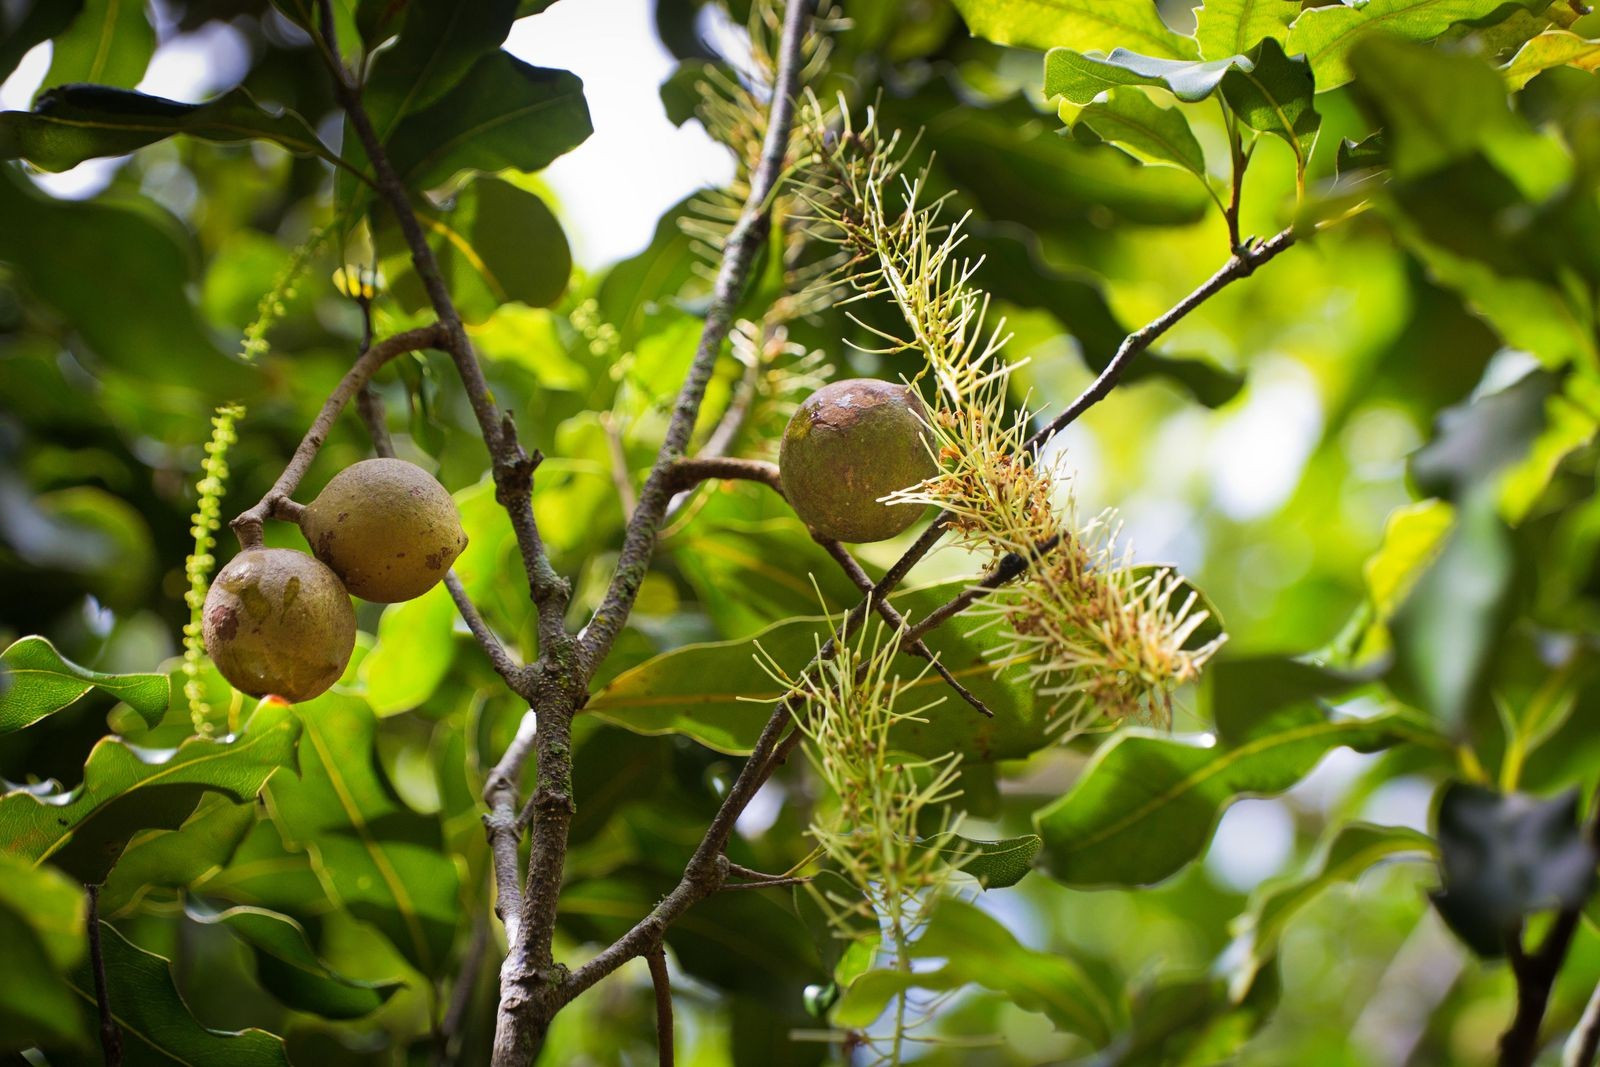 Prime Minister required a new development strategy for macadamia trees: founding a production chain with enterprises as a core factor, associations as a main factor and people- an important factor